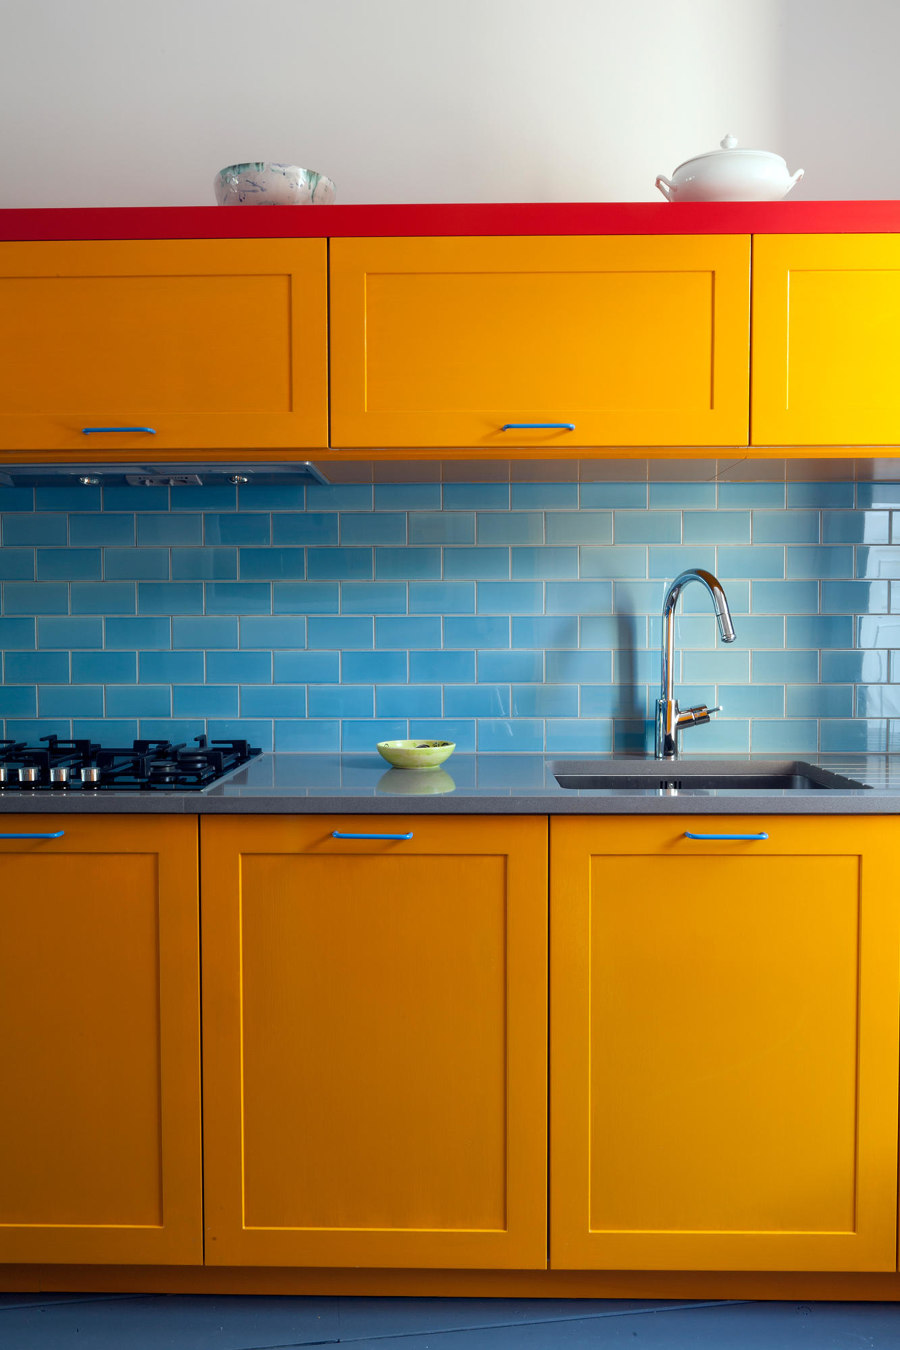 Eight creative material options for a kitchen backsplash | News